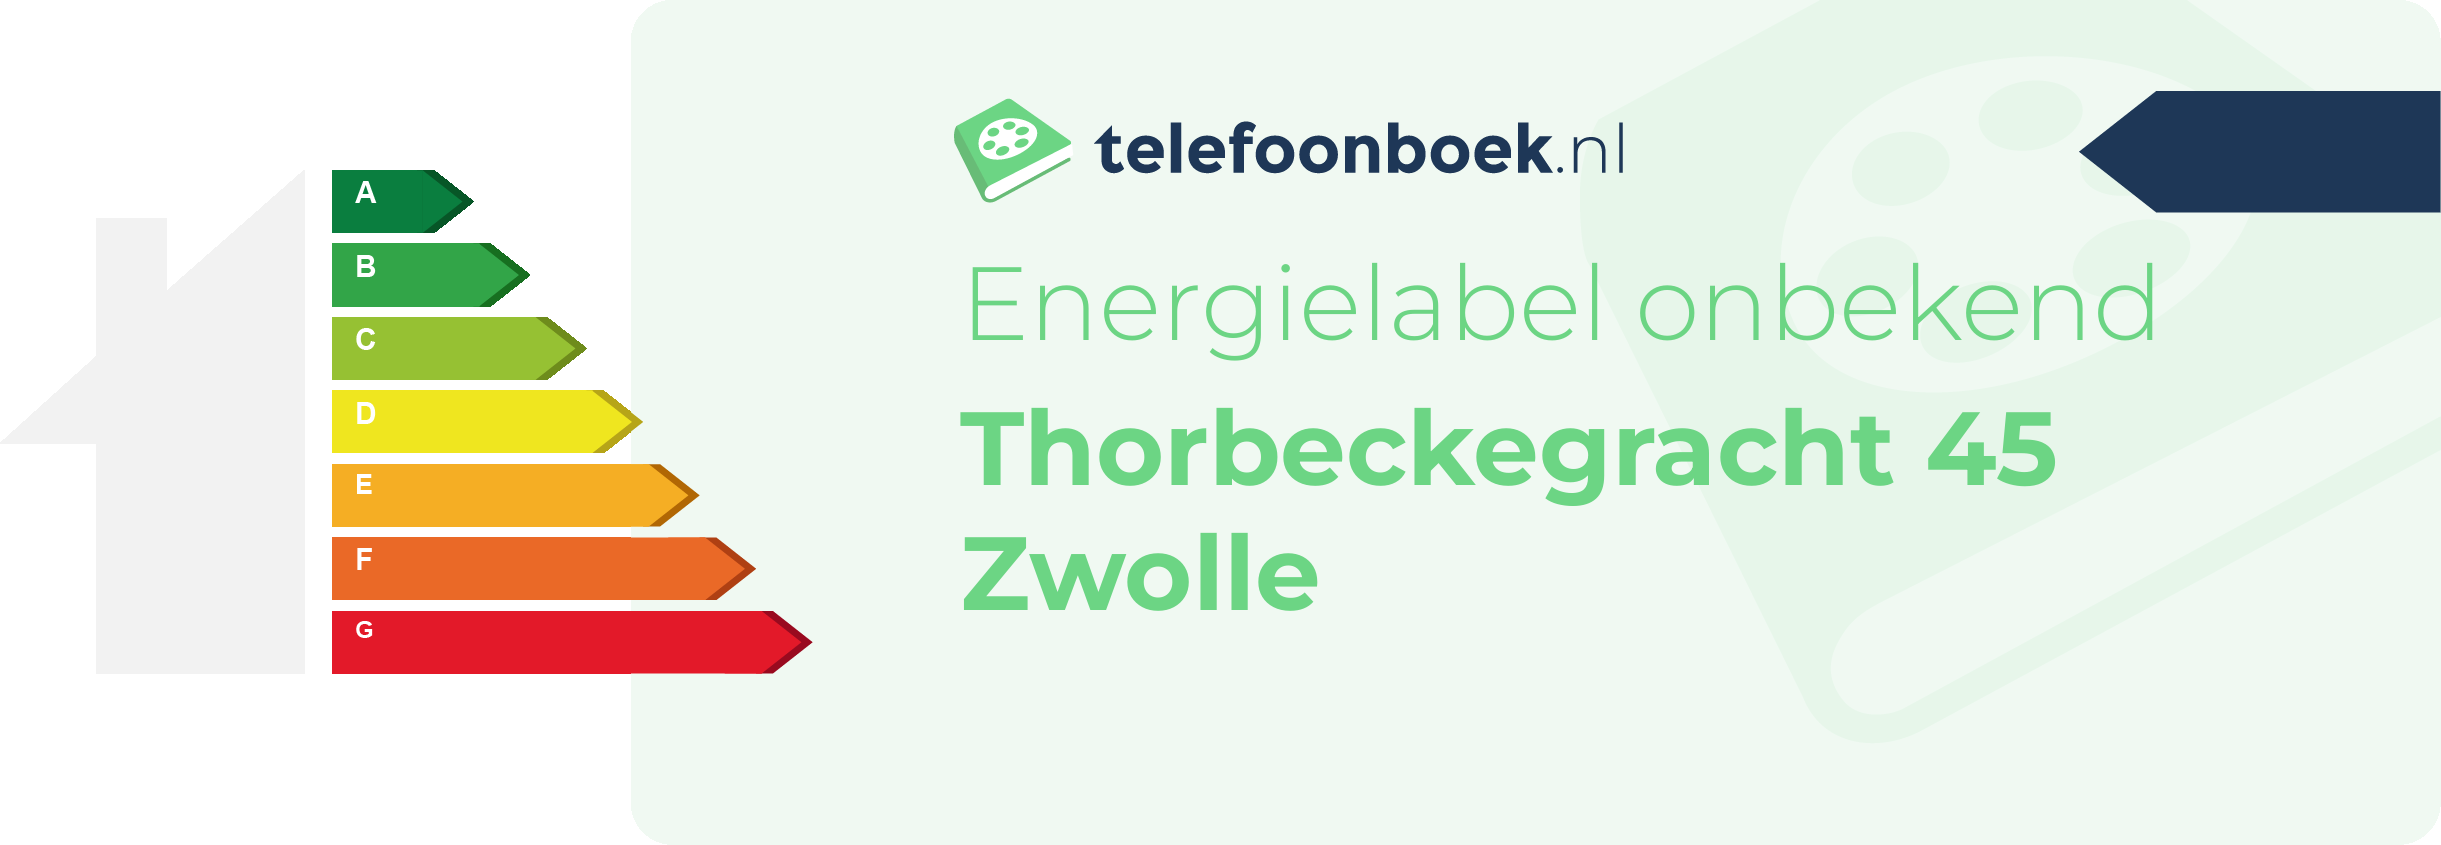 Energielabel Thorbeckegracht 45 Zwolle